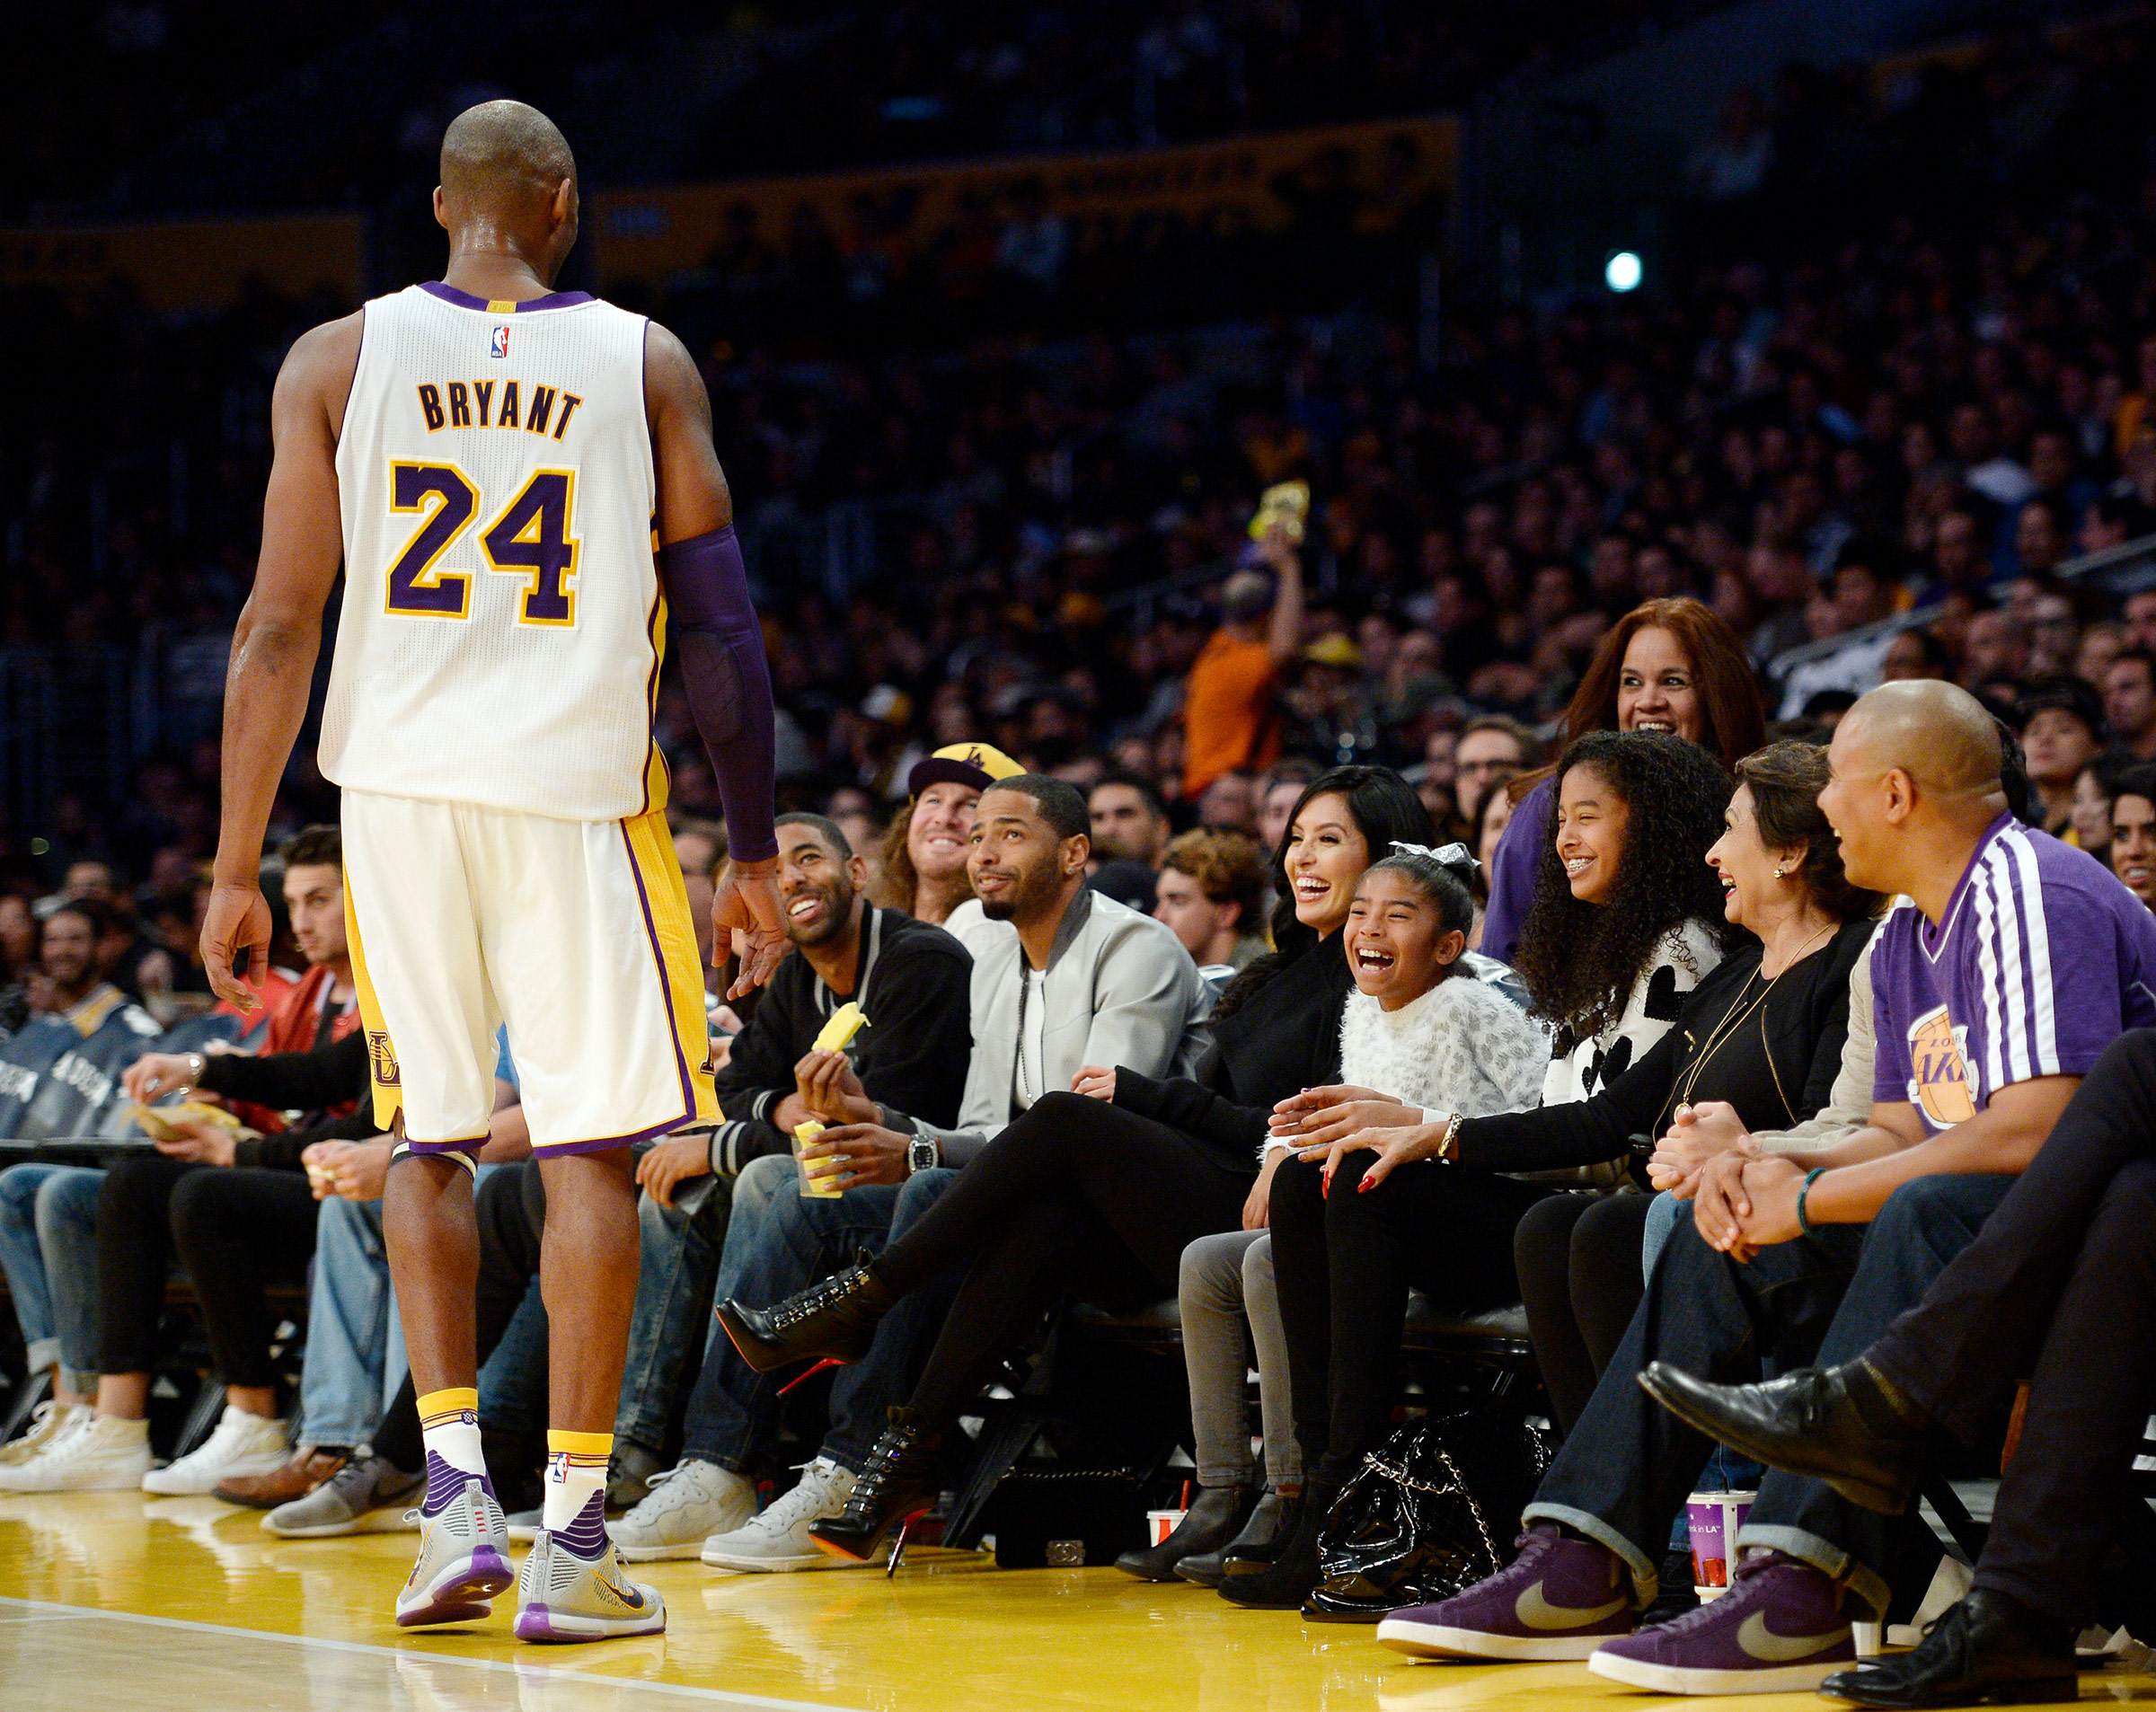 Kobe Bryant of the Los Angeles Lakers speaks with his daughters Gianna, 8, Natalia, 12, and wife Vanessa during the basketball game against the Indiana Pacersin Los Angeles, on Nov. 29, 2015 (Kevork Djanzesian—Getty Images)